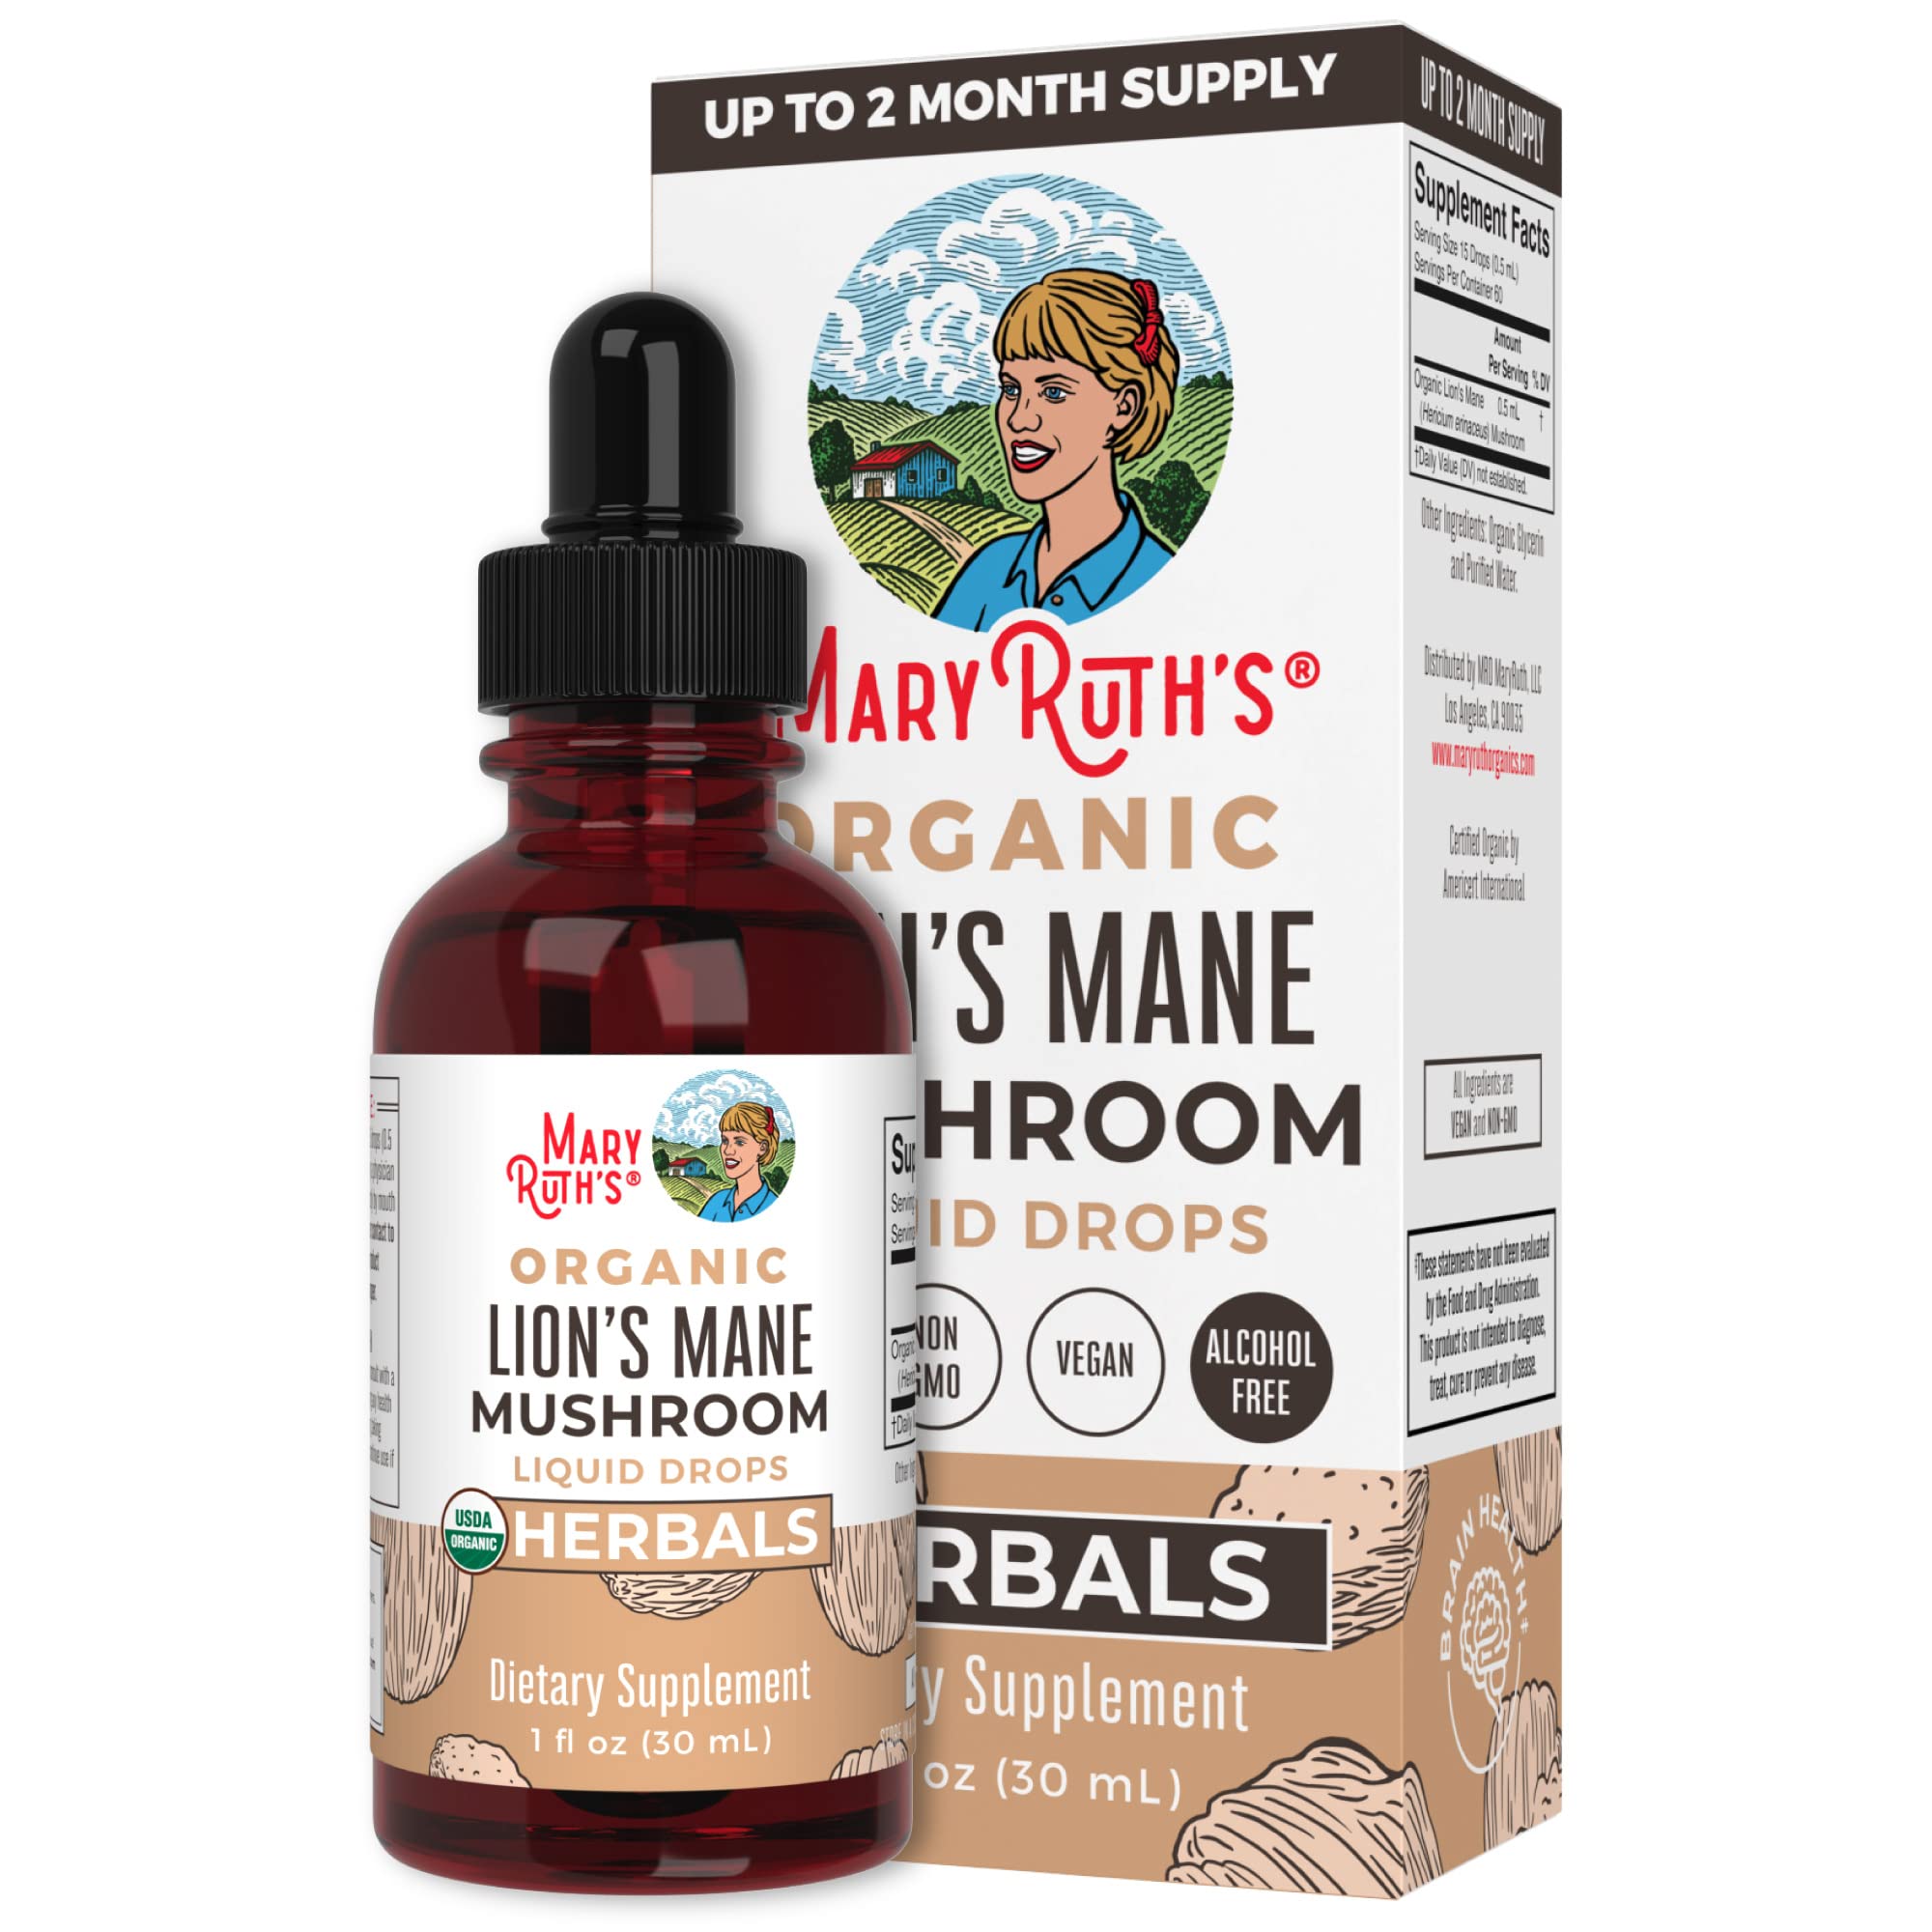 MaryRuth's Chlorophyll Liquid Drops + Lions Mane Mushroom Extract 2-Pack Bundle | Energy Boost, Immune Support, Detox and Cleanse, Brain Boost | Vegan, Non-GMO